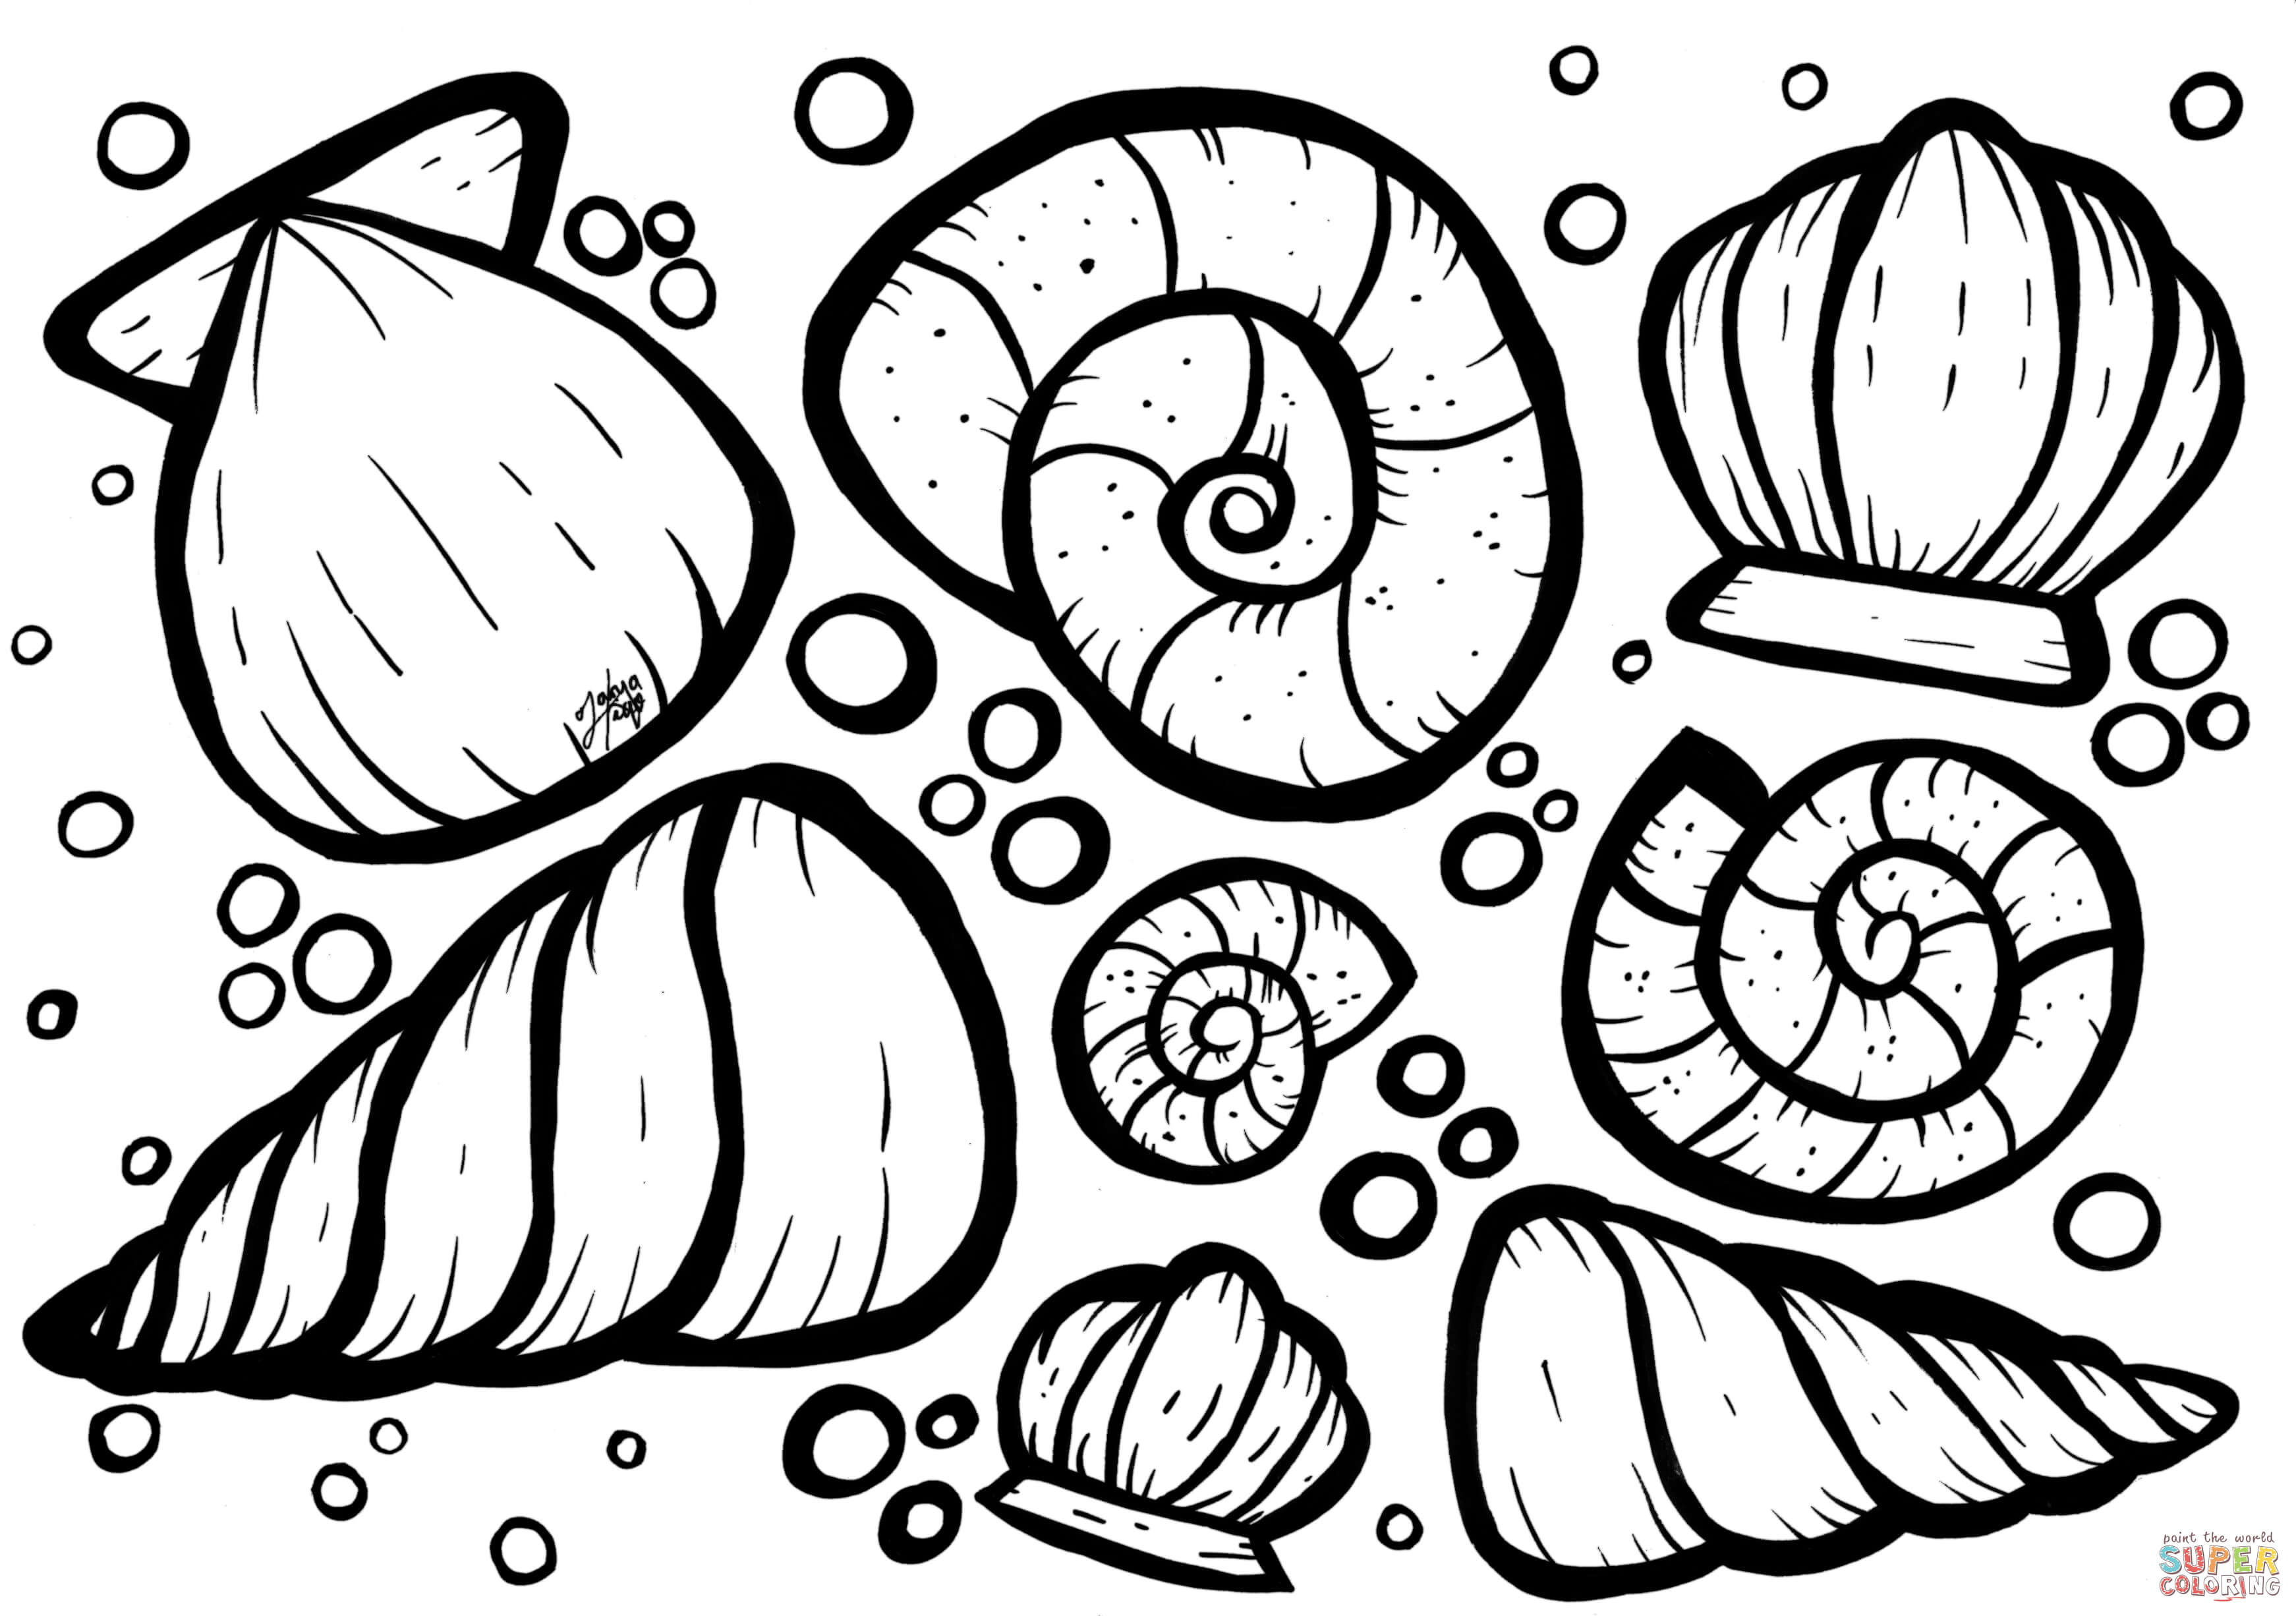 Shells coloring page free printable coloring pages